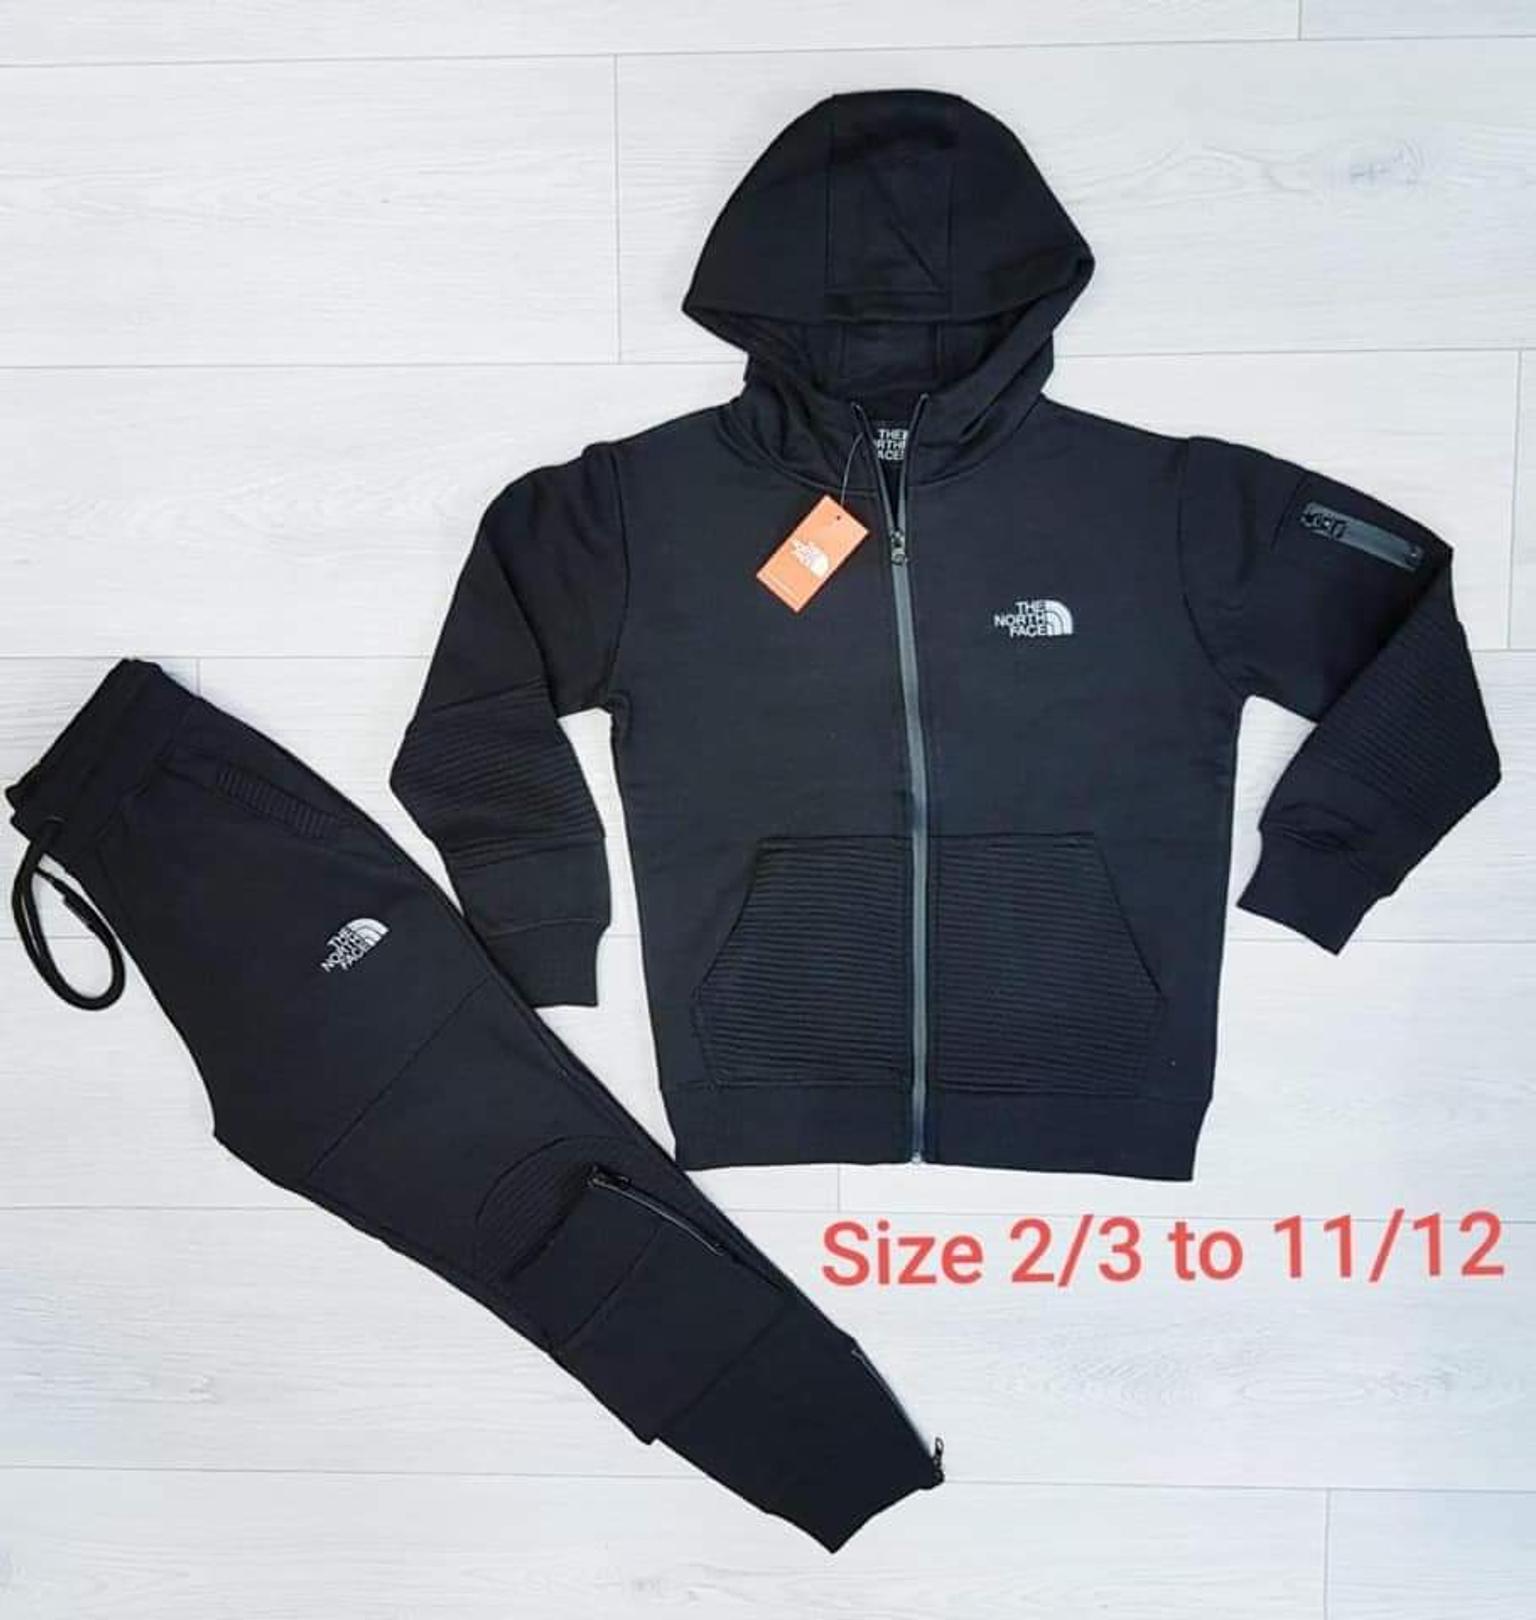 childrens north face tracksuit